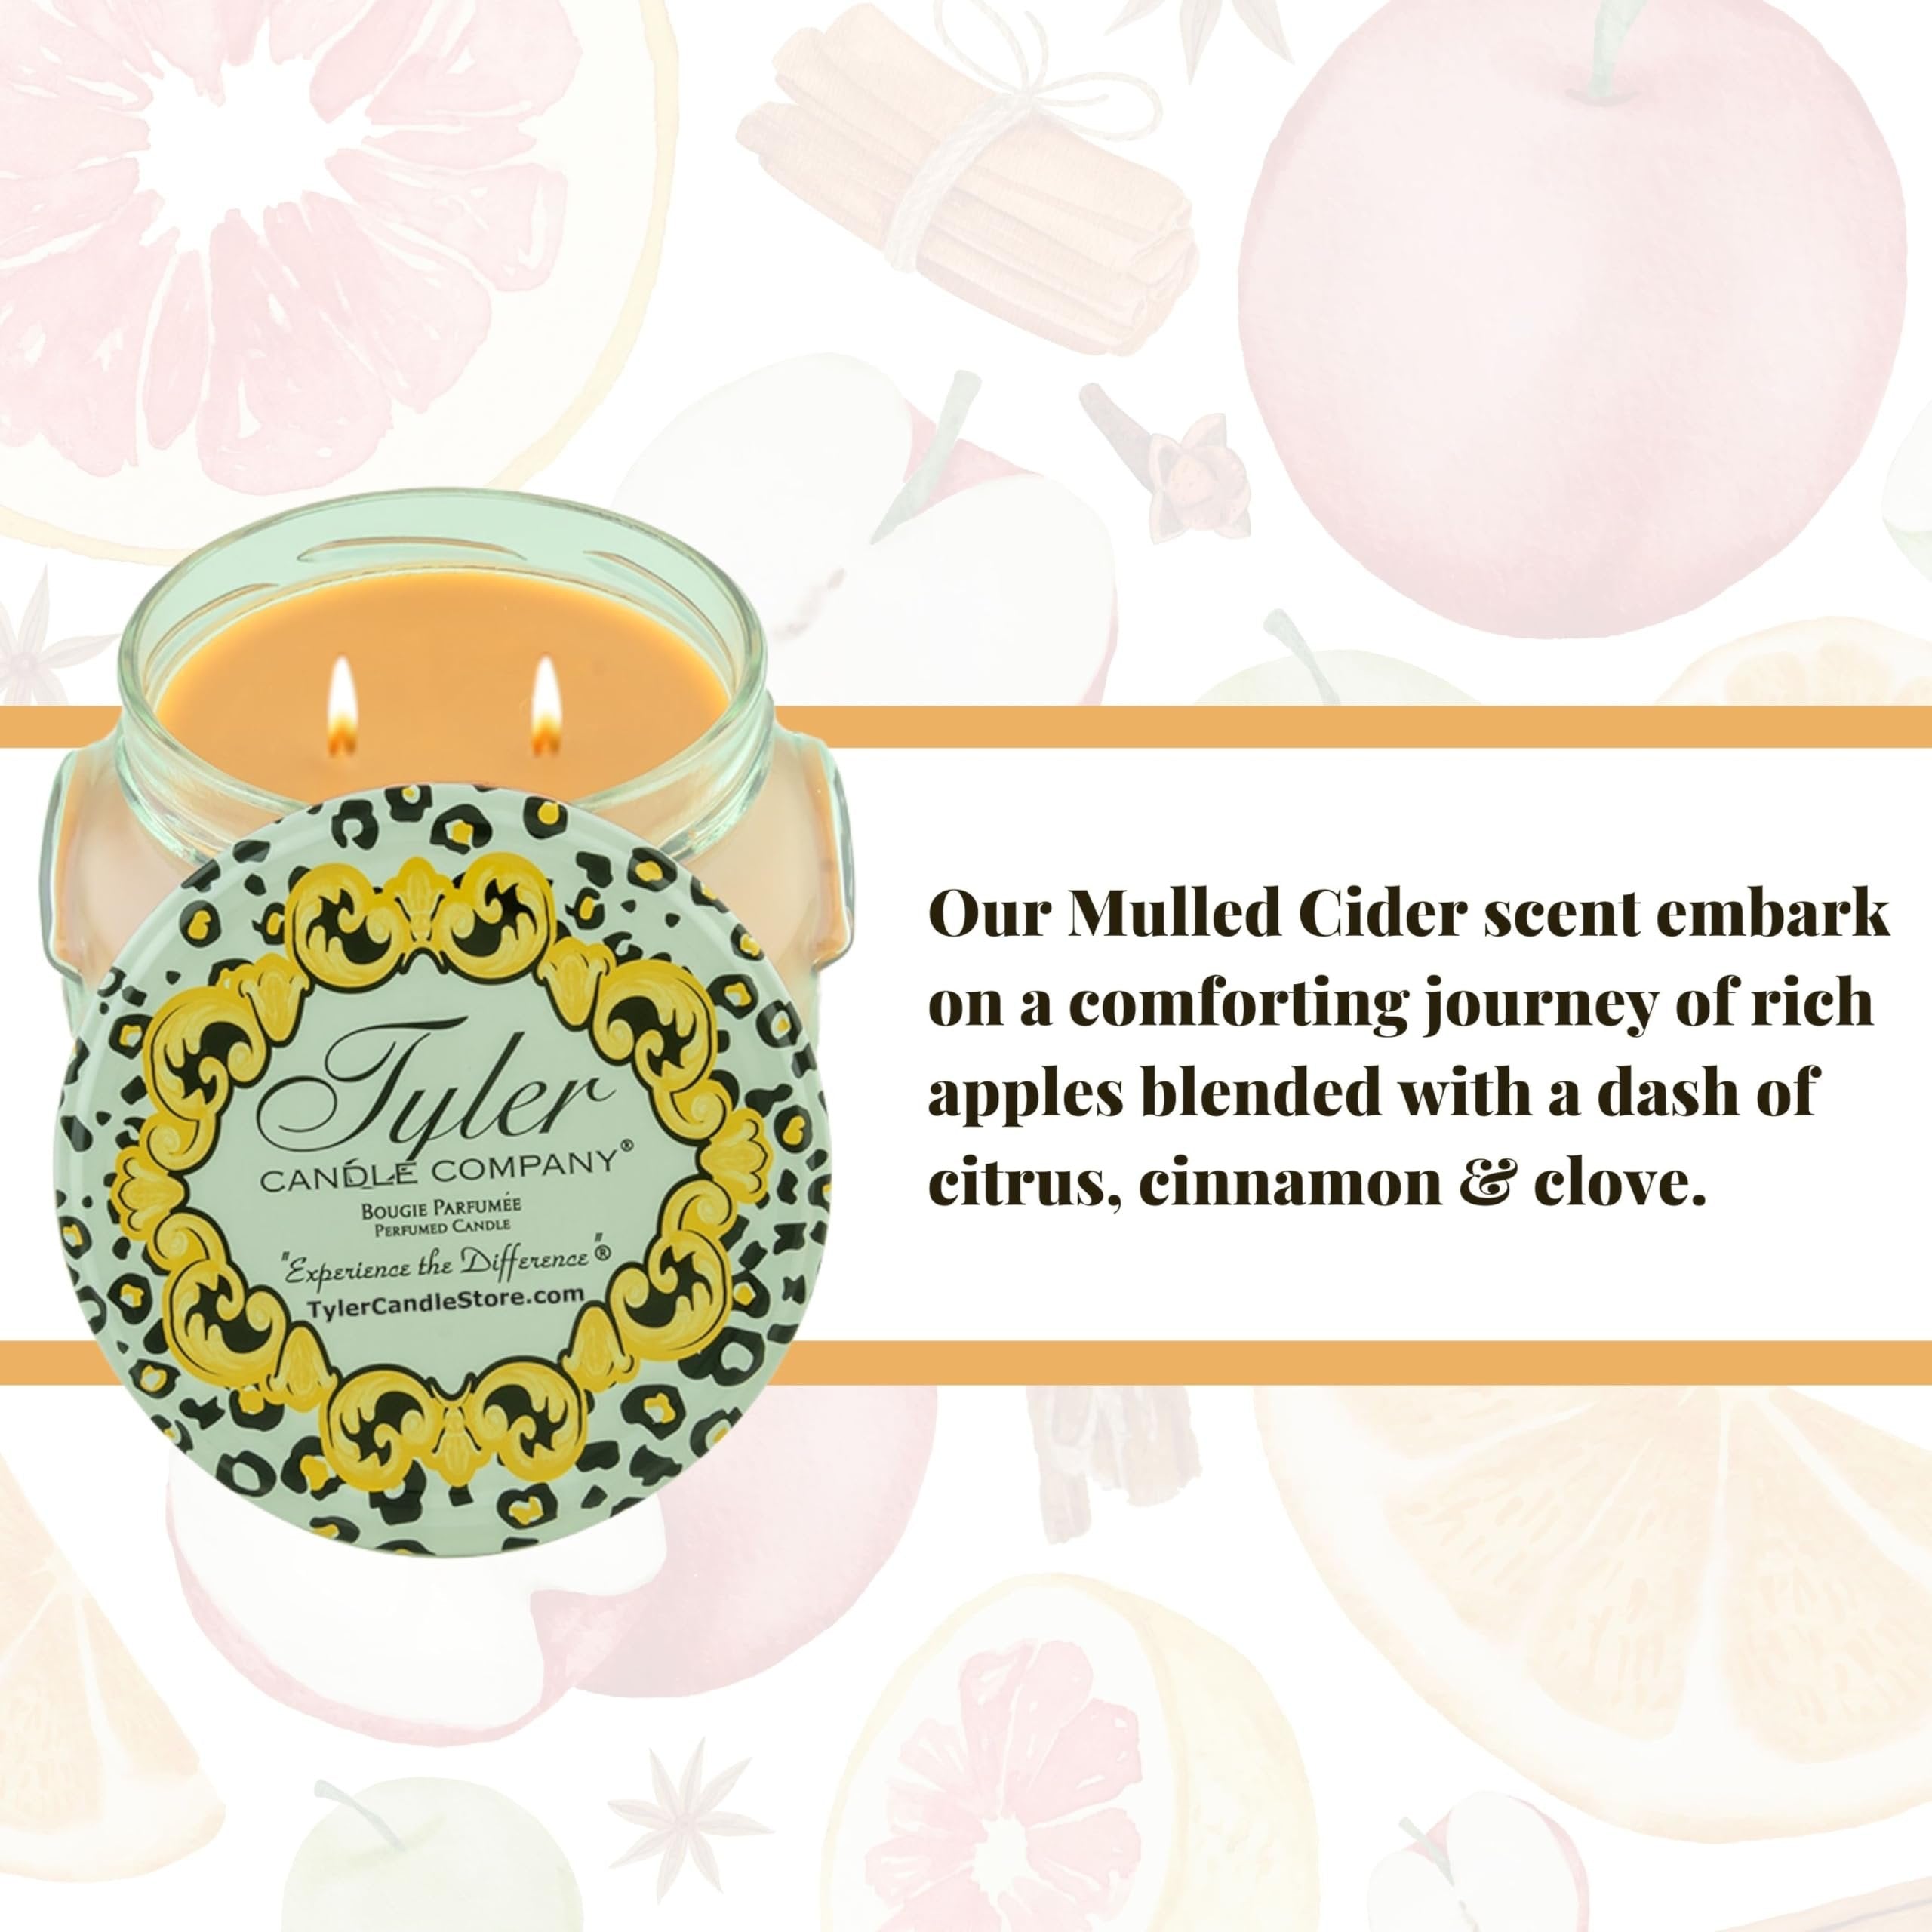 Tyler Candle Company Mulled Cider Candles - Luxuriously Fall Scented Candle with Essential Oils - 22 oz Extra Large Candle & Multi-Purpose Key Chain